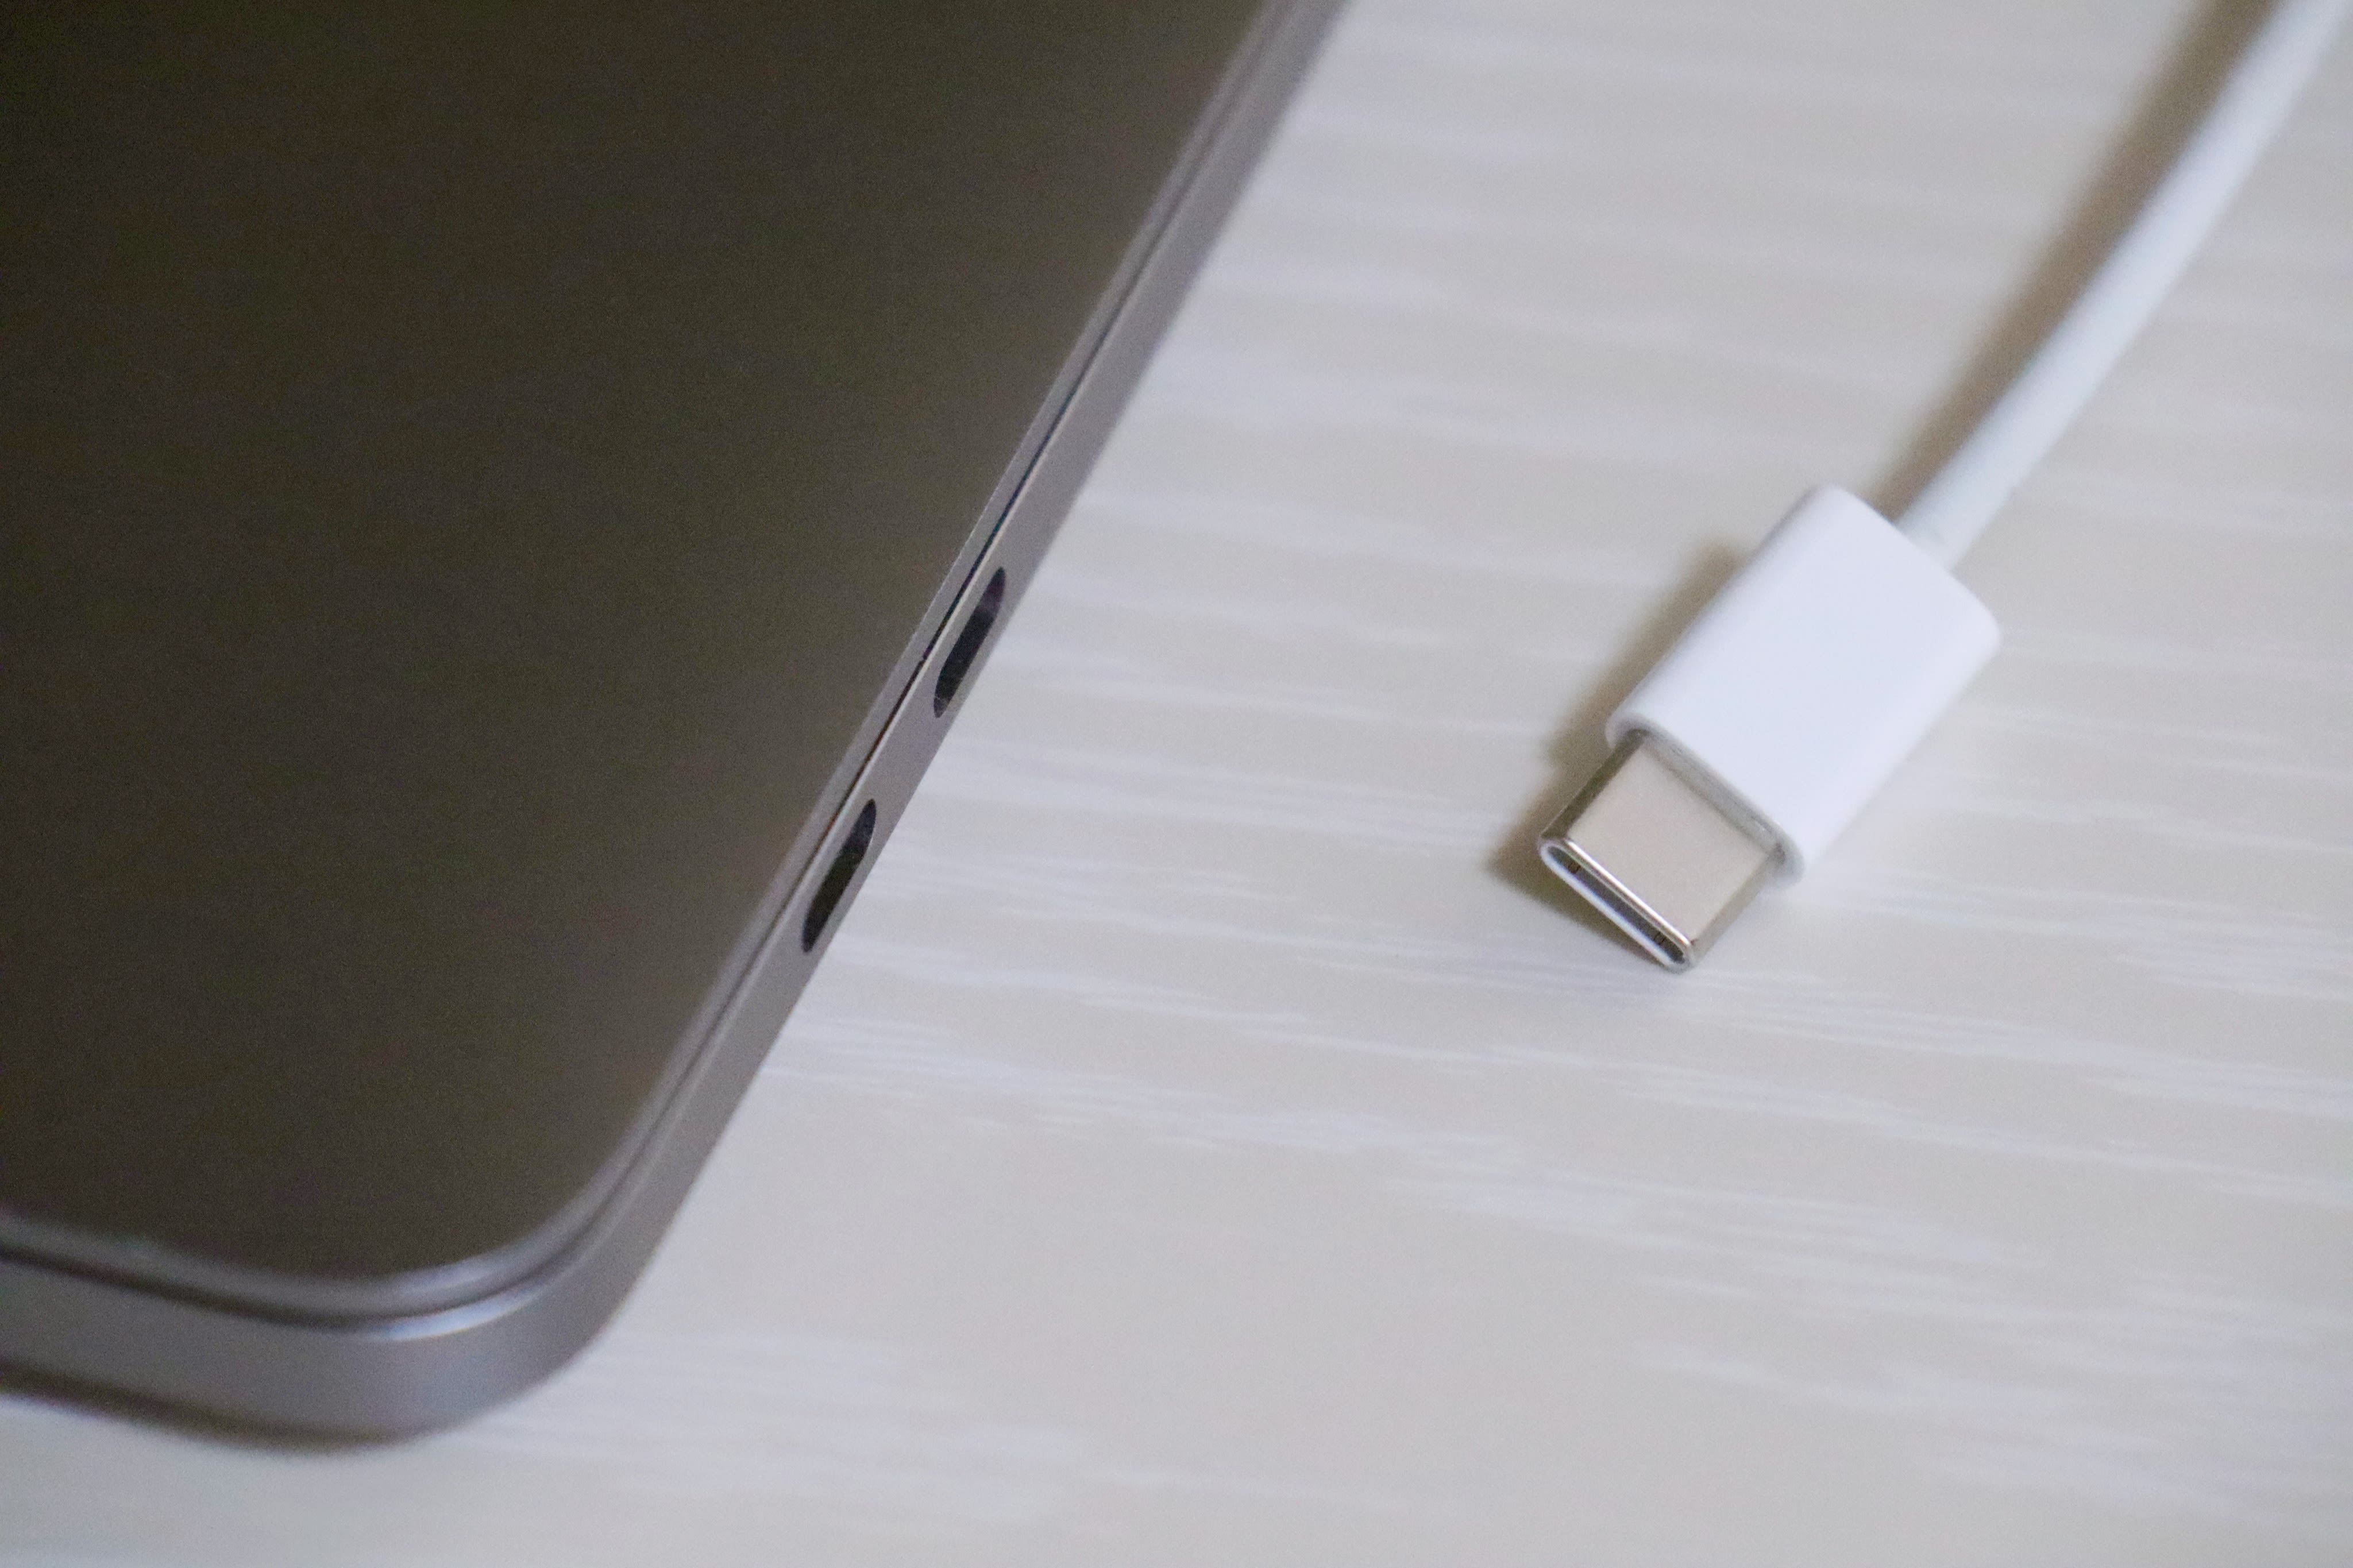 Best USB-C cables in | CNN Underscored